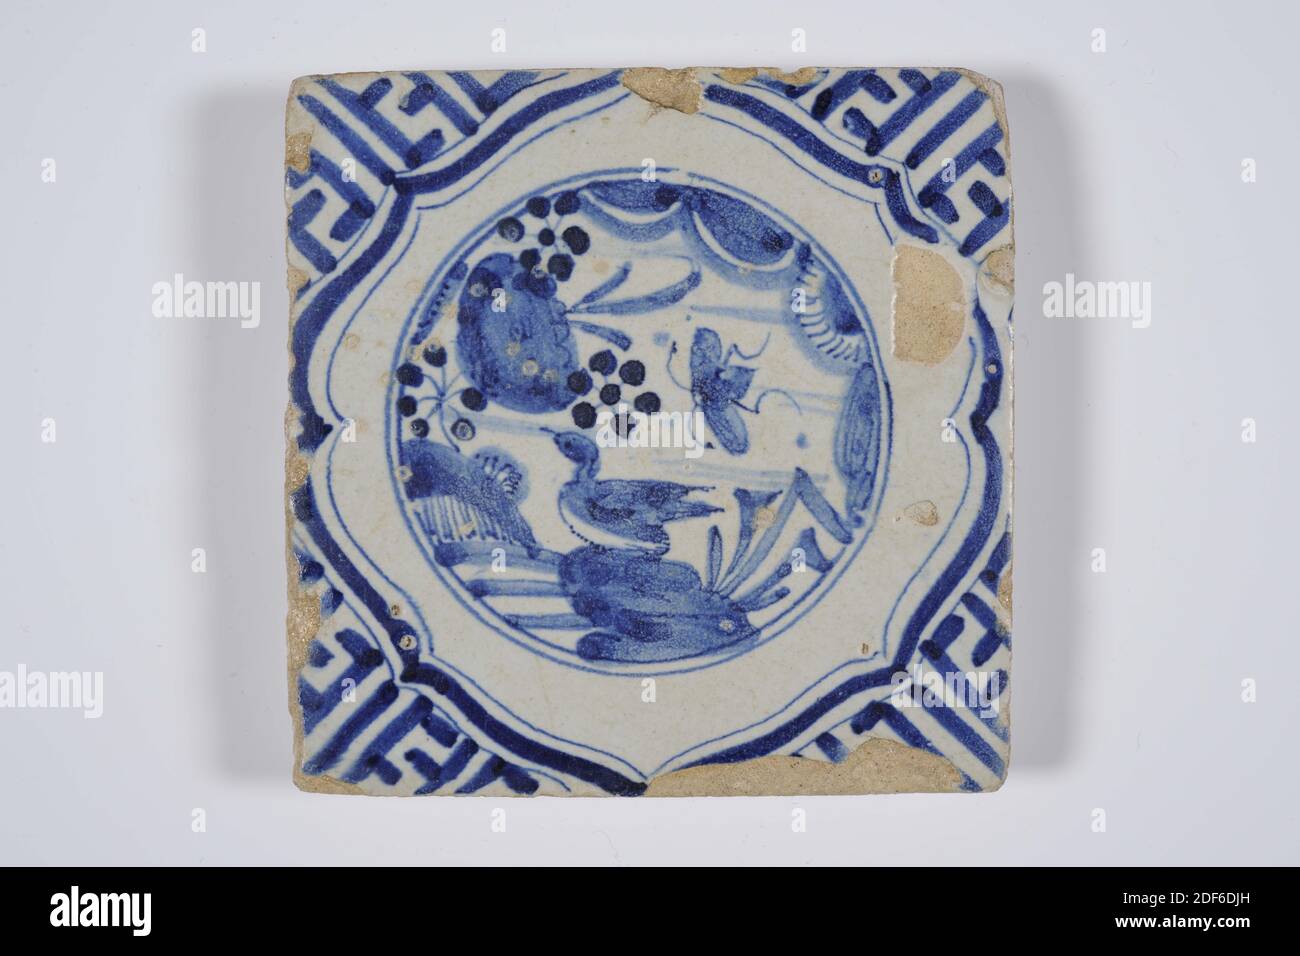 wall tile, Anonymous, first half 17th century, tin glaze, earthenware, General: 11 x 11 x 1.6cm (110 x 110 x 16mm), water surface, duck, insect, northern netherlands, Earthenware wall tile covered with tin glaze and painted in blue. The tile depicts a Chinoiserie representation of a duck and an insect in braces near a water surface. The tile has meanders as a corner motif, 1985 Stock Photo